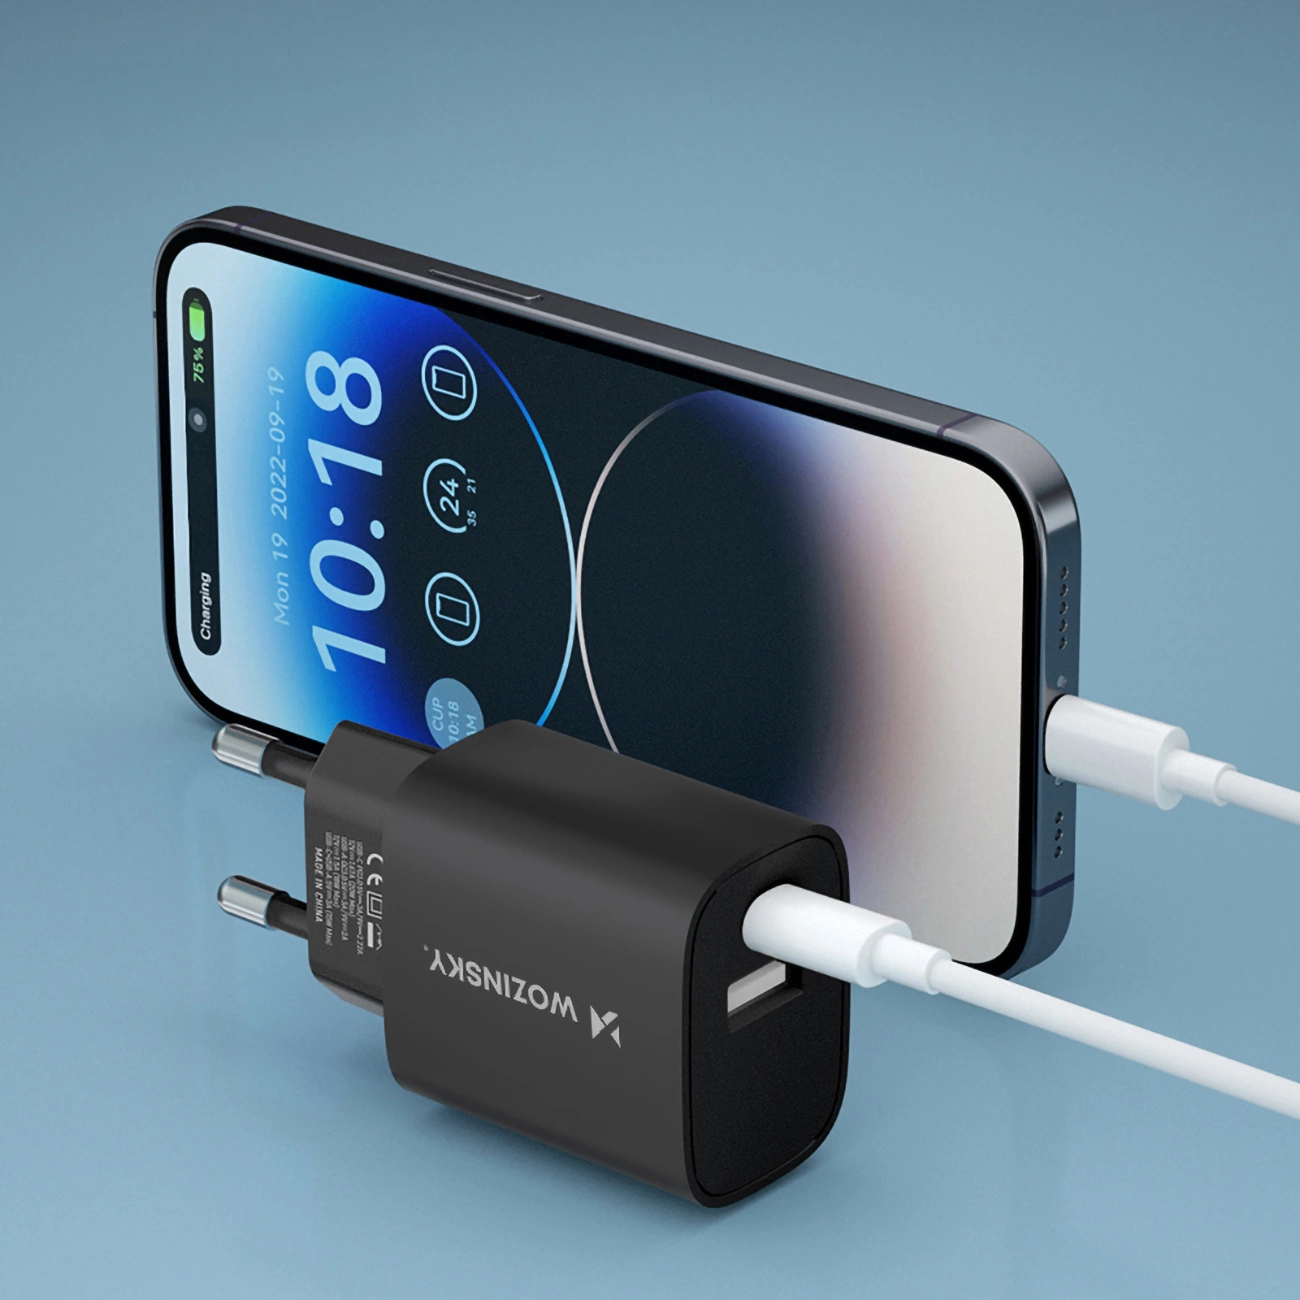 iPhone connected to the Wozinsky WGWCB wall charger with USB-A and USB-C connectors with a power of up to 20W via a white cable